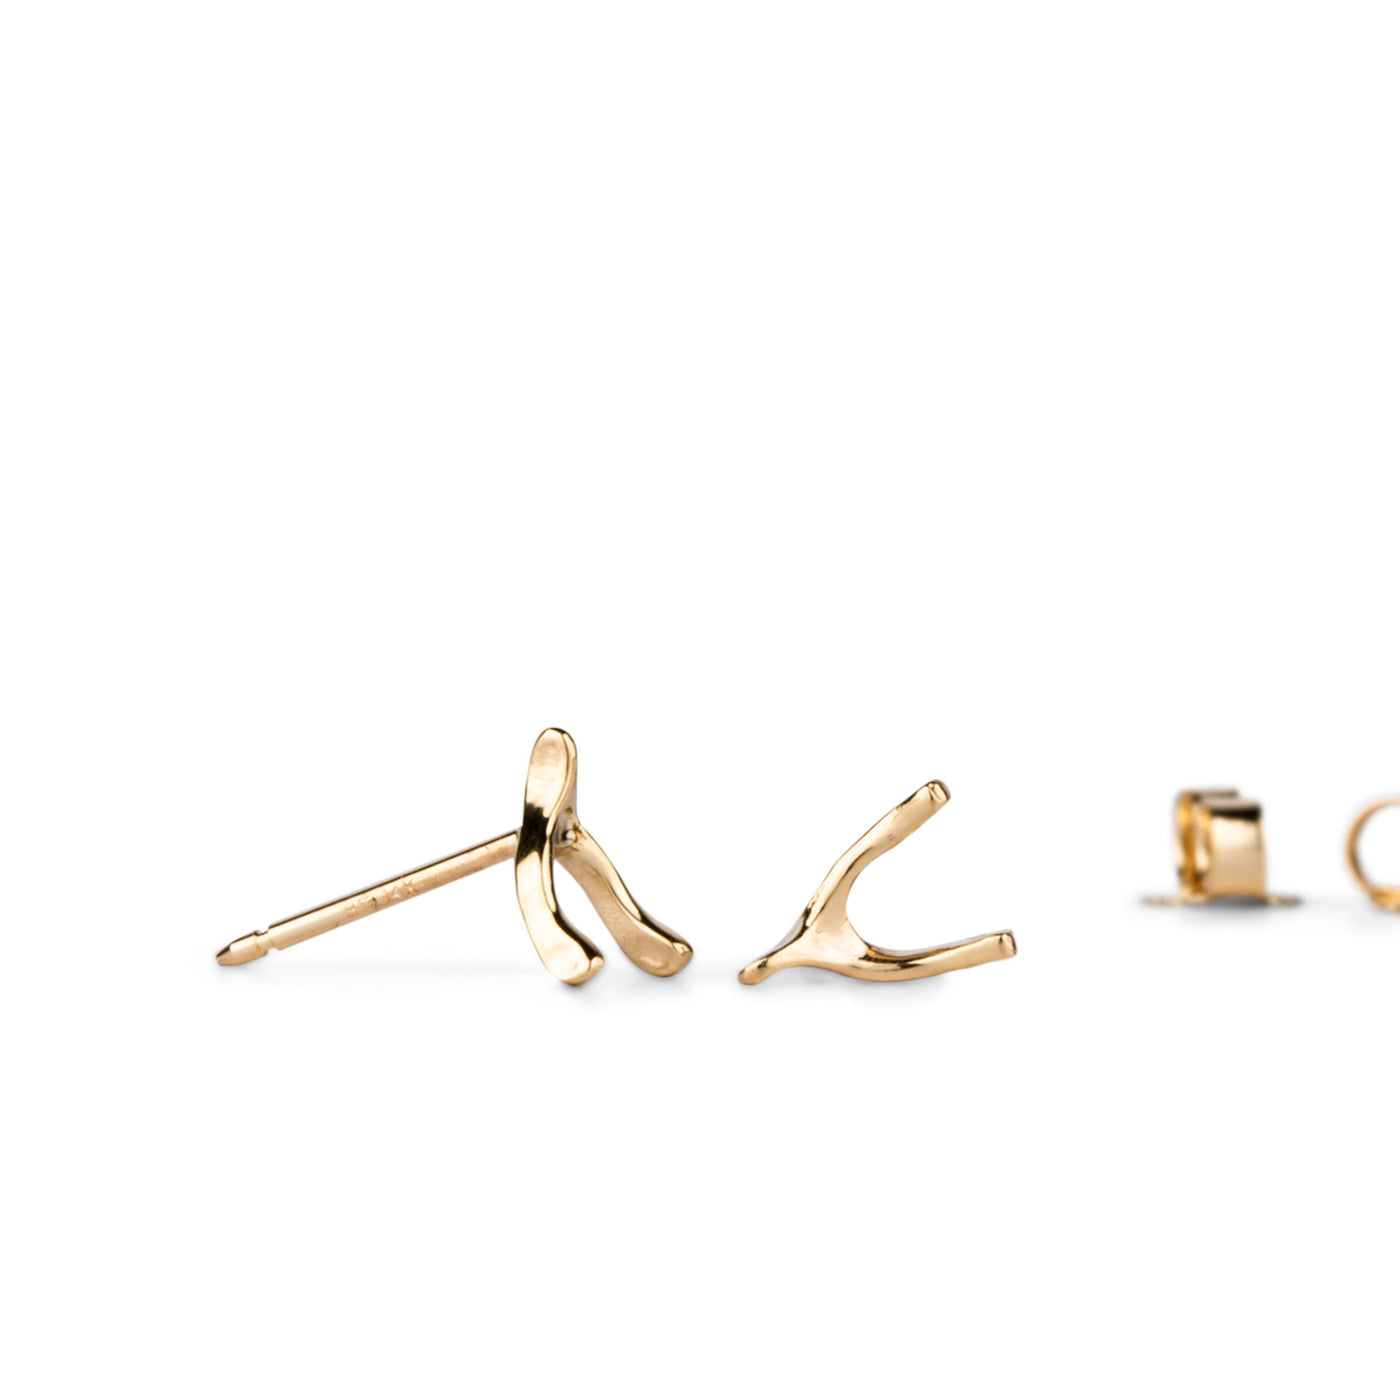 14k Yellow Gold Wishbone Stud Earrings by Corey Egan side view on a white background